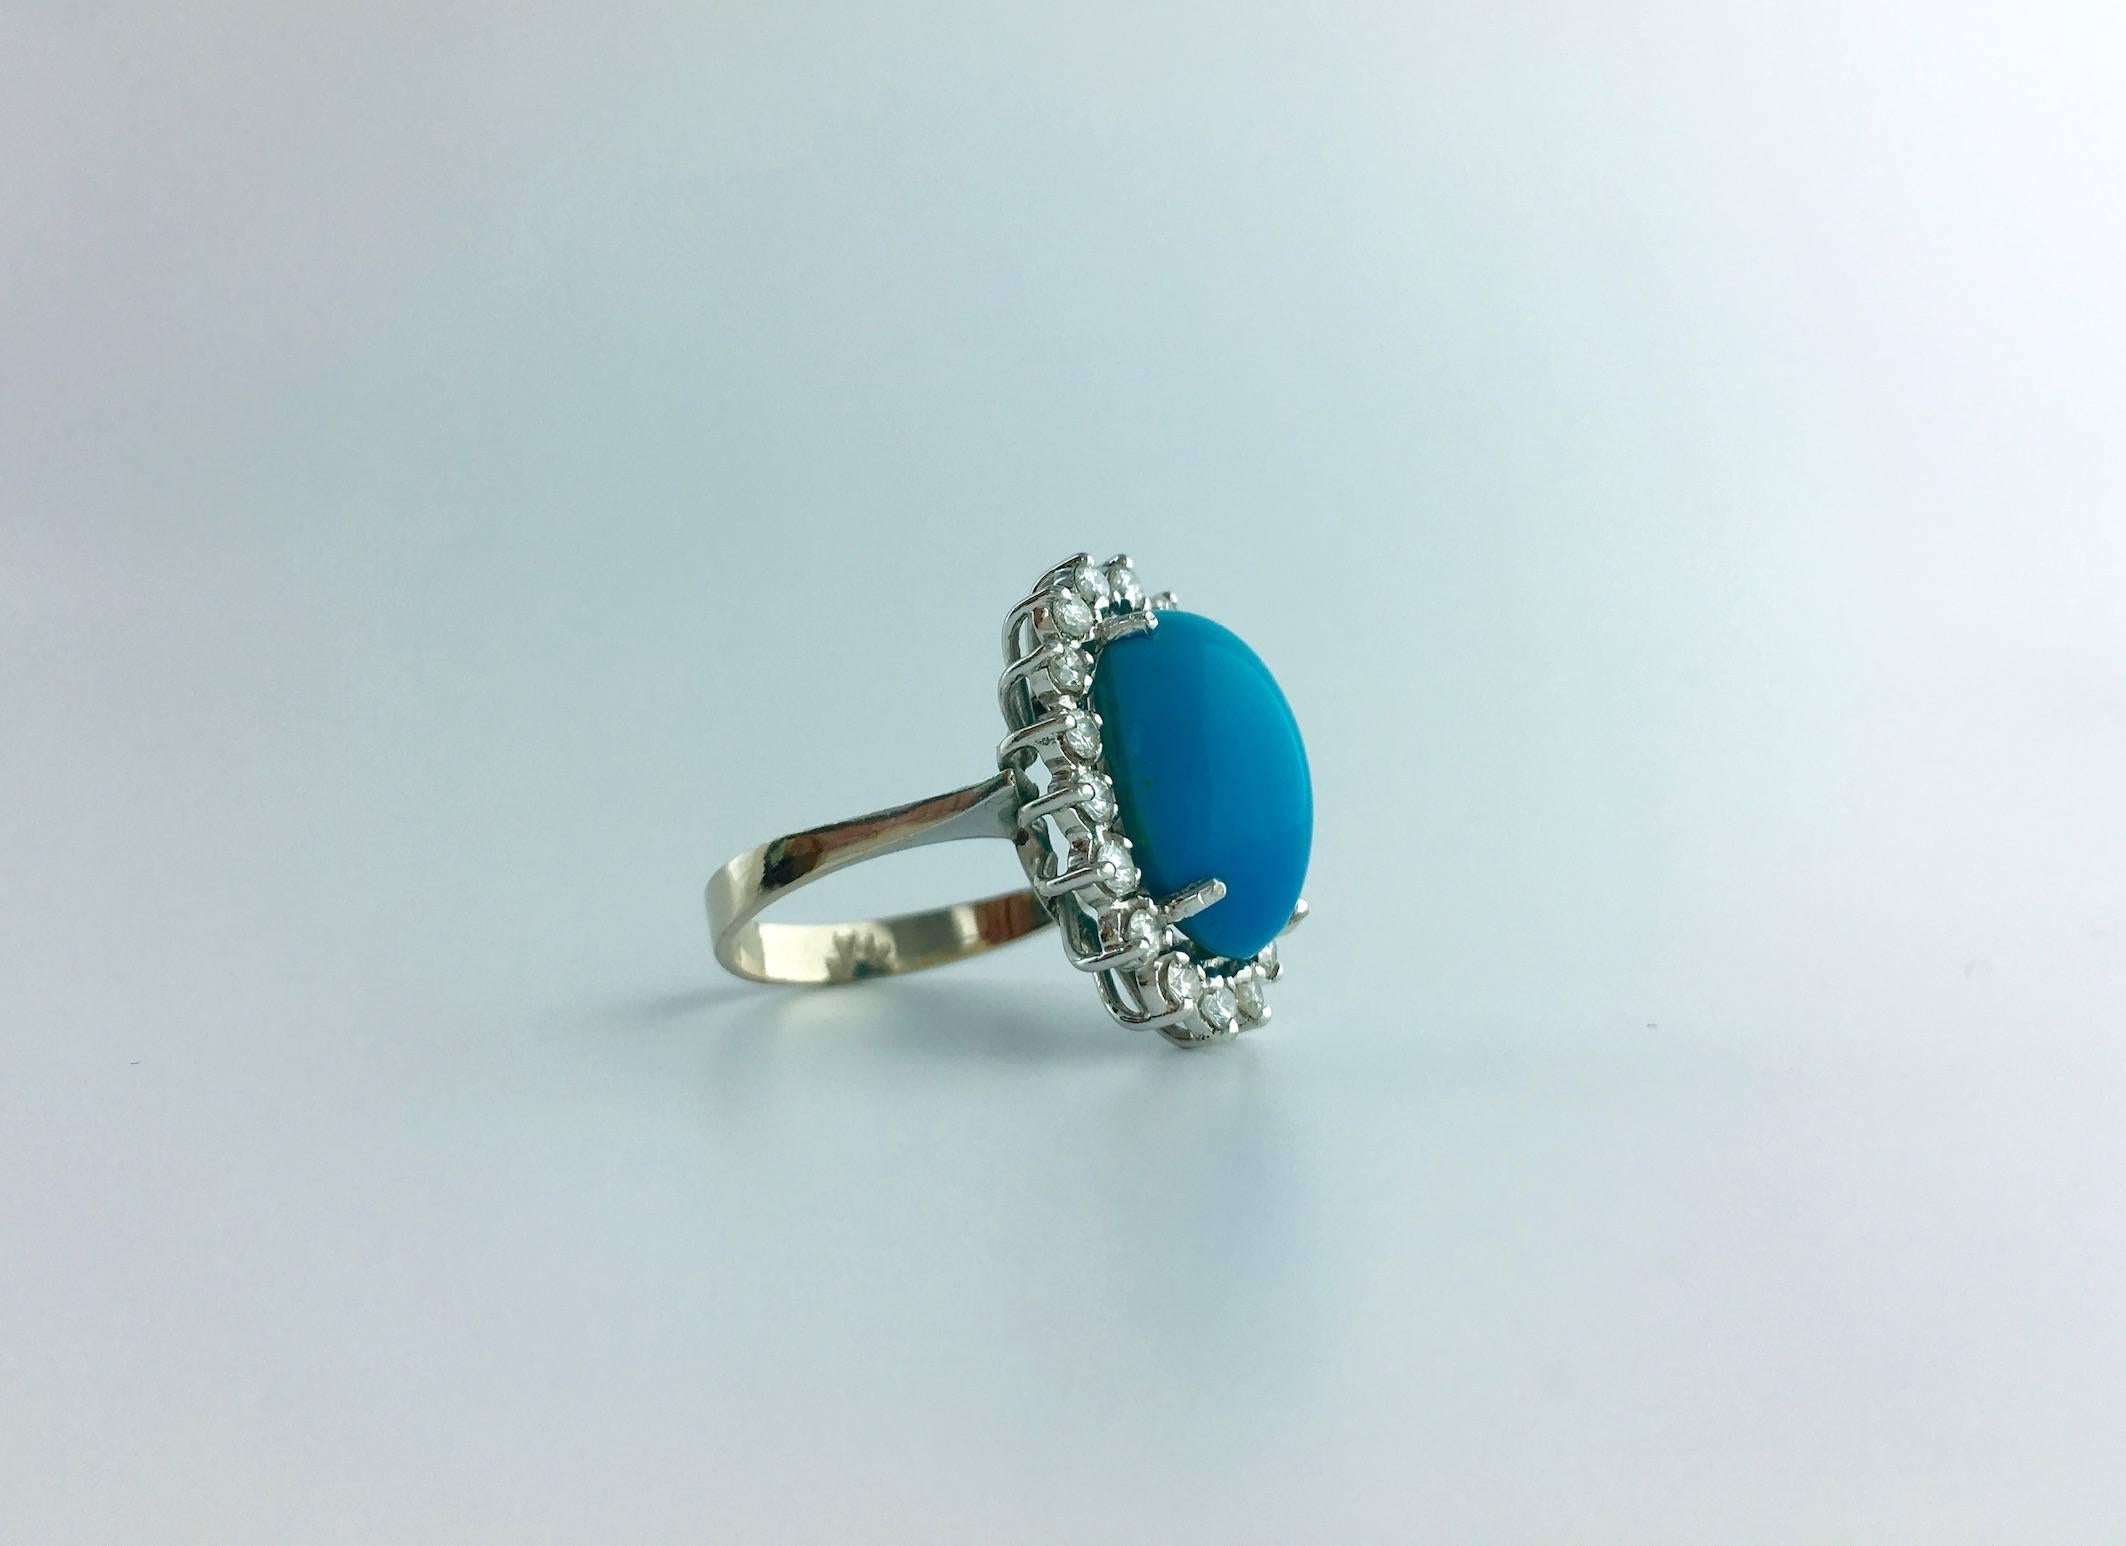 Magnificent Turquoise Natural of a perfect Blue surrounded by Diamond on white gold ring.
Circa 1980.

Size: 8
Can be sized if required.

Gross weight: 8.13 grams